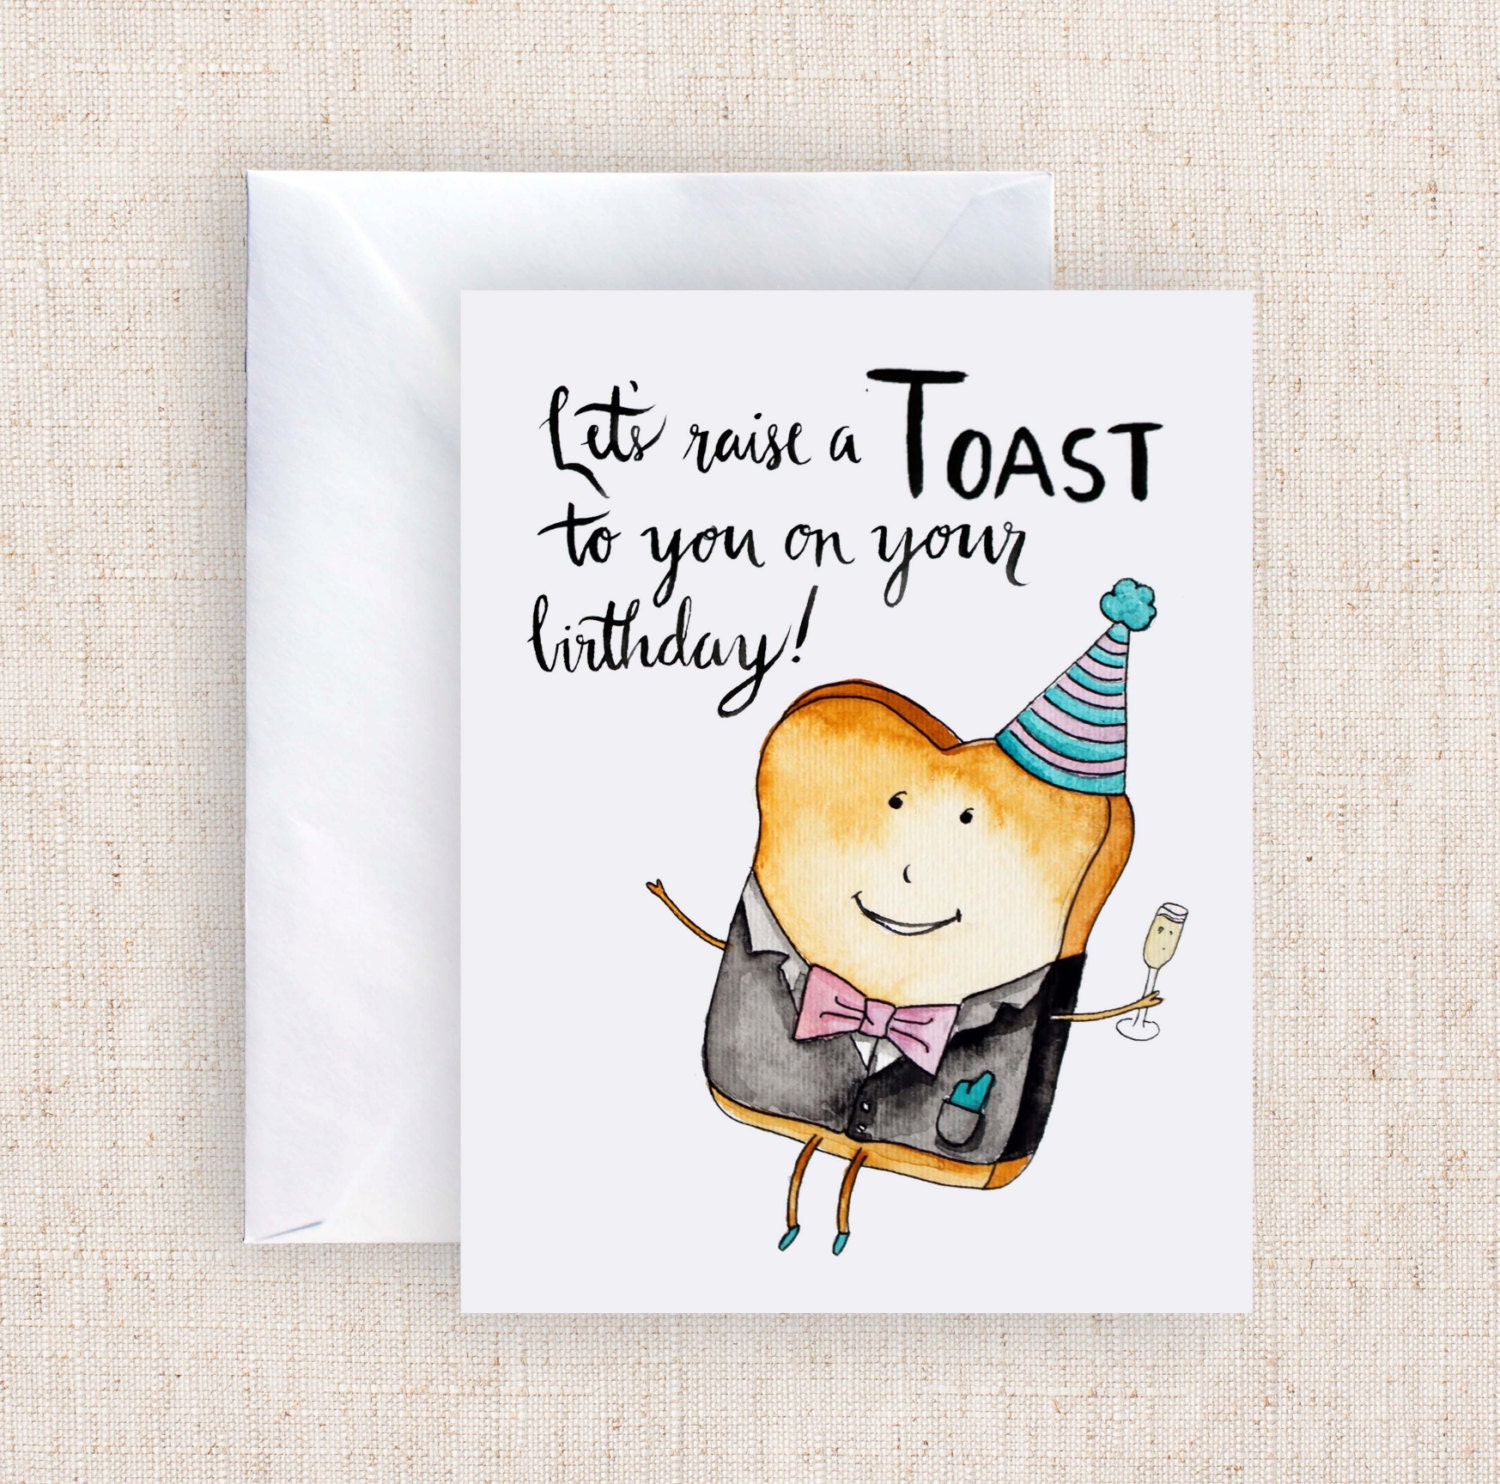 Here's a TOAST to you on your Birthday Handmade Watercolor